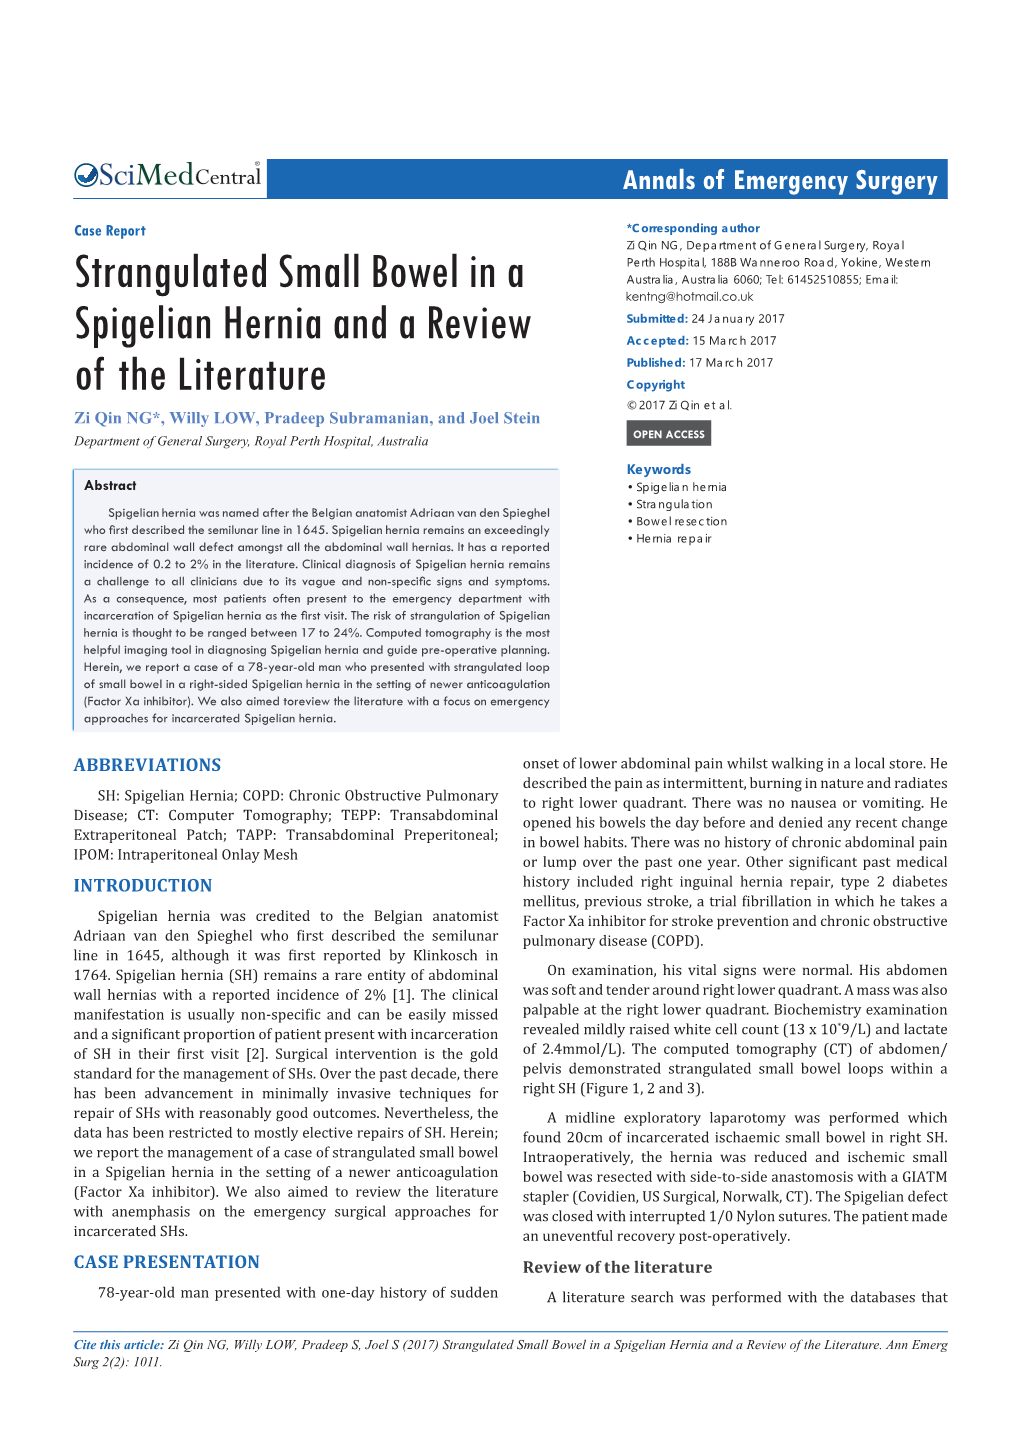 Strangulated Small Bowel in a Spigelian Hernia and a Review of the Literature